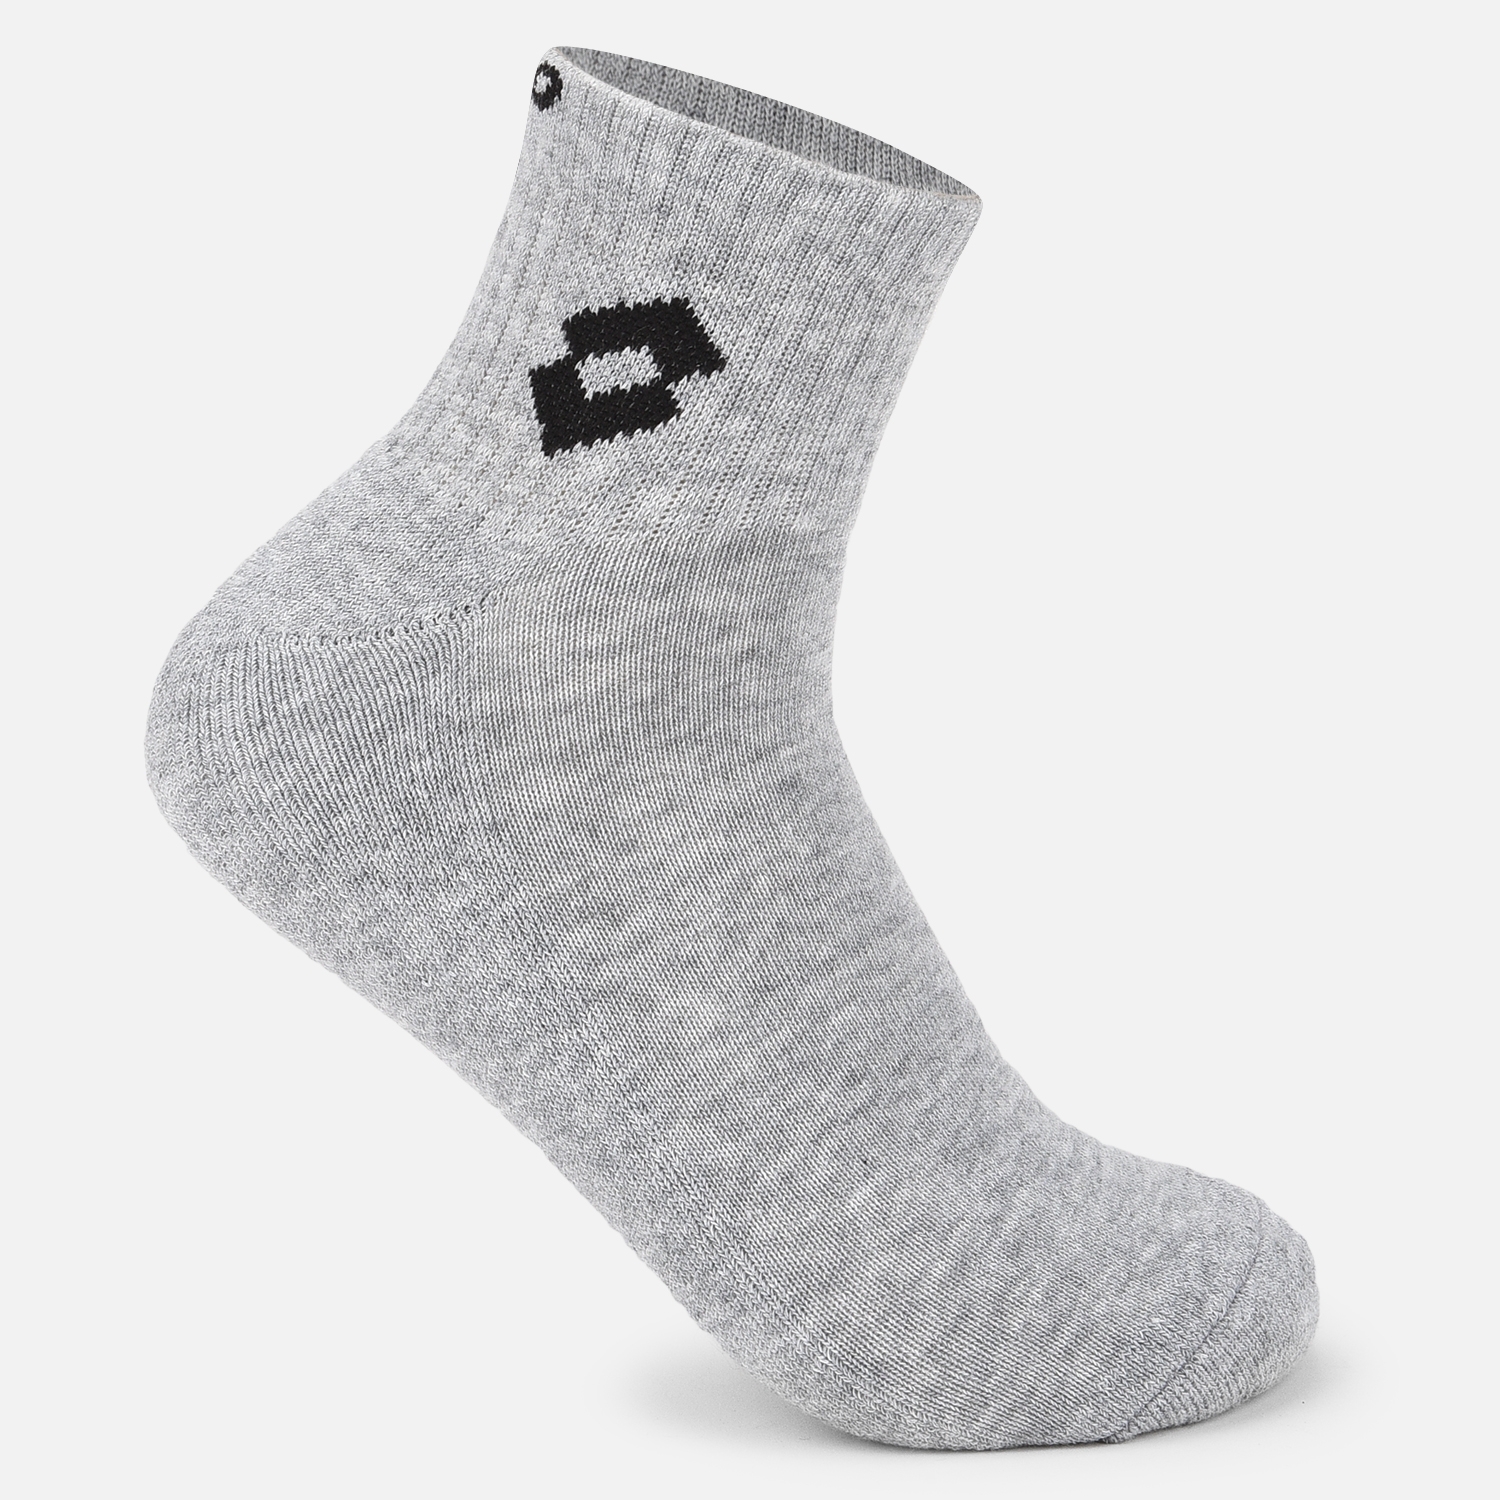 Lotto | LOTTO ANKLE SOCKS GREY/BLACK/WHITE (PACK OF 3)